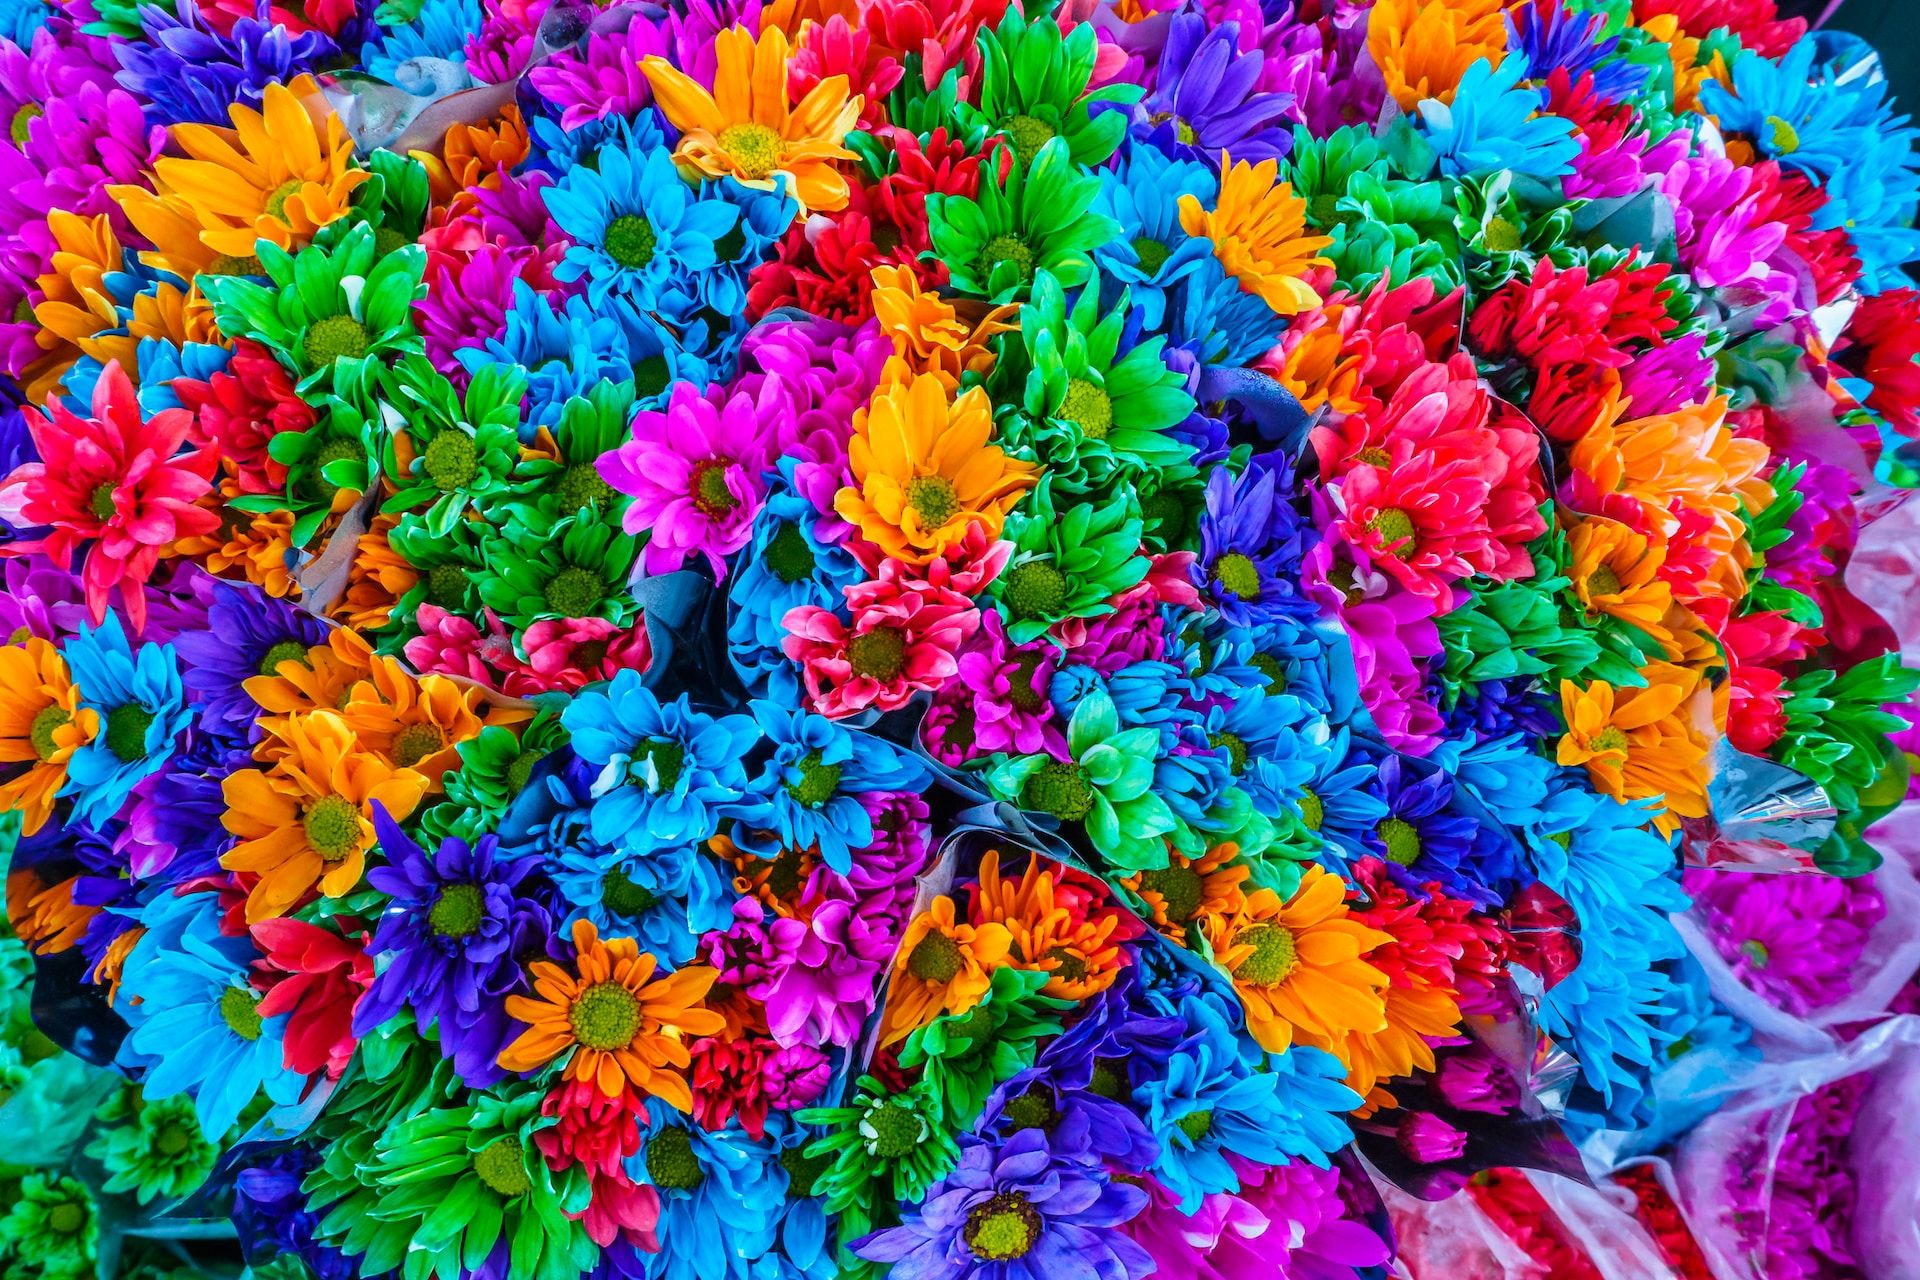 bouquets of colourful flowers - pink, orange, green, purple, blue - bunched together in a colourful mosaic